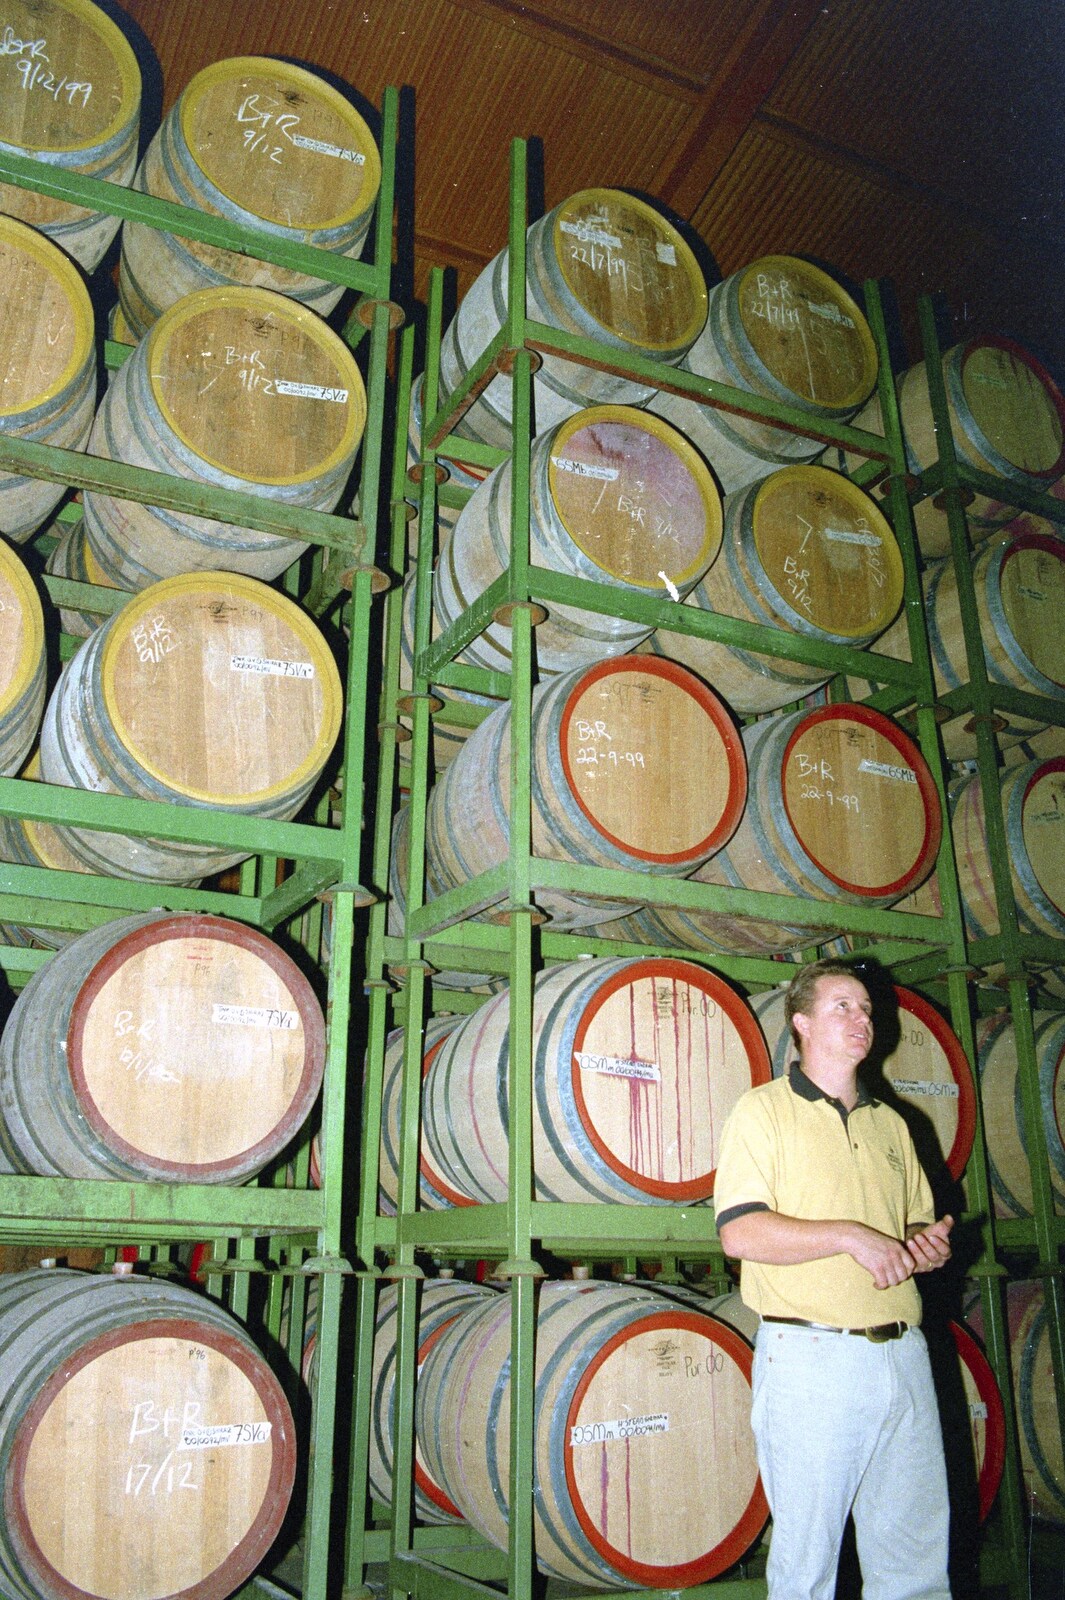 Loads of wine in barrels, maturing from A Trip to the Zoo, Sydney, Australia - 7th April 2000